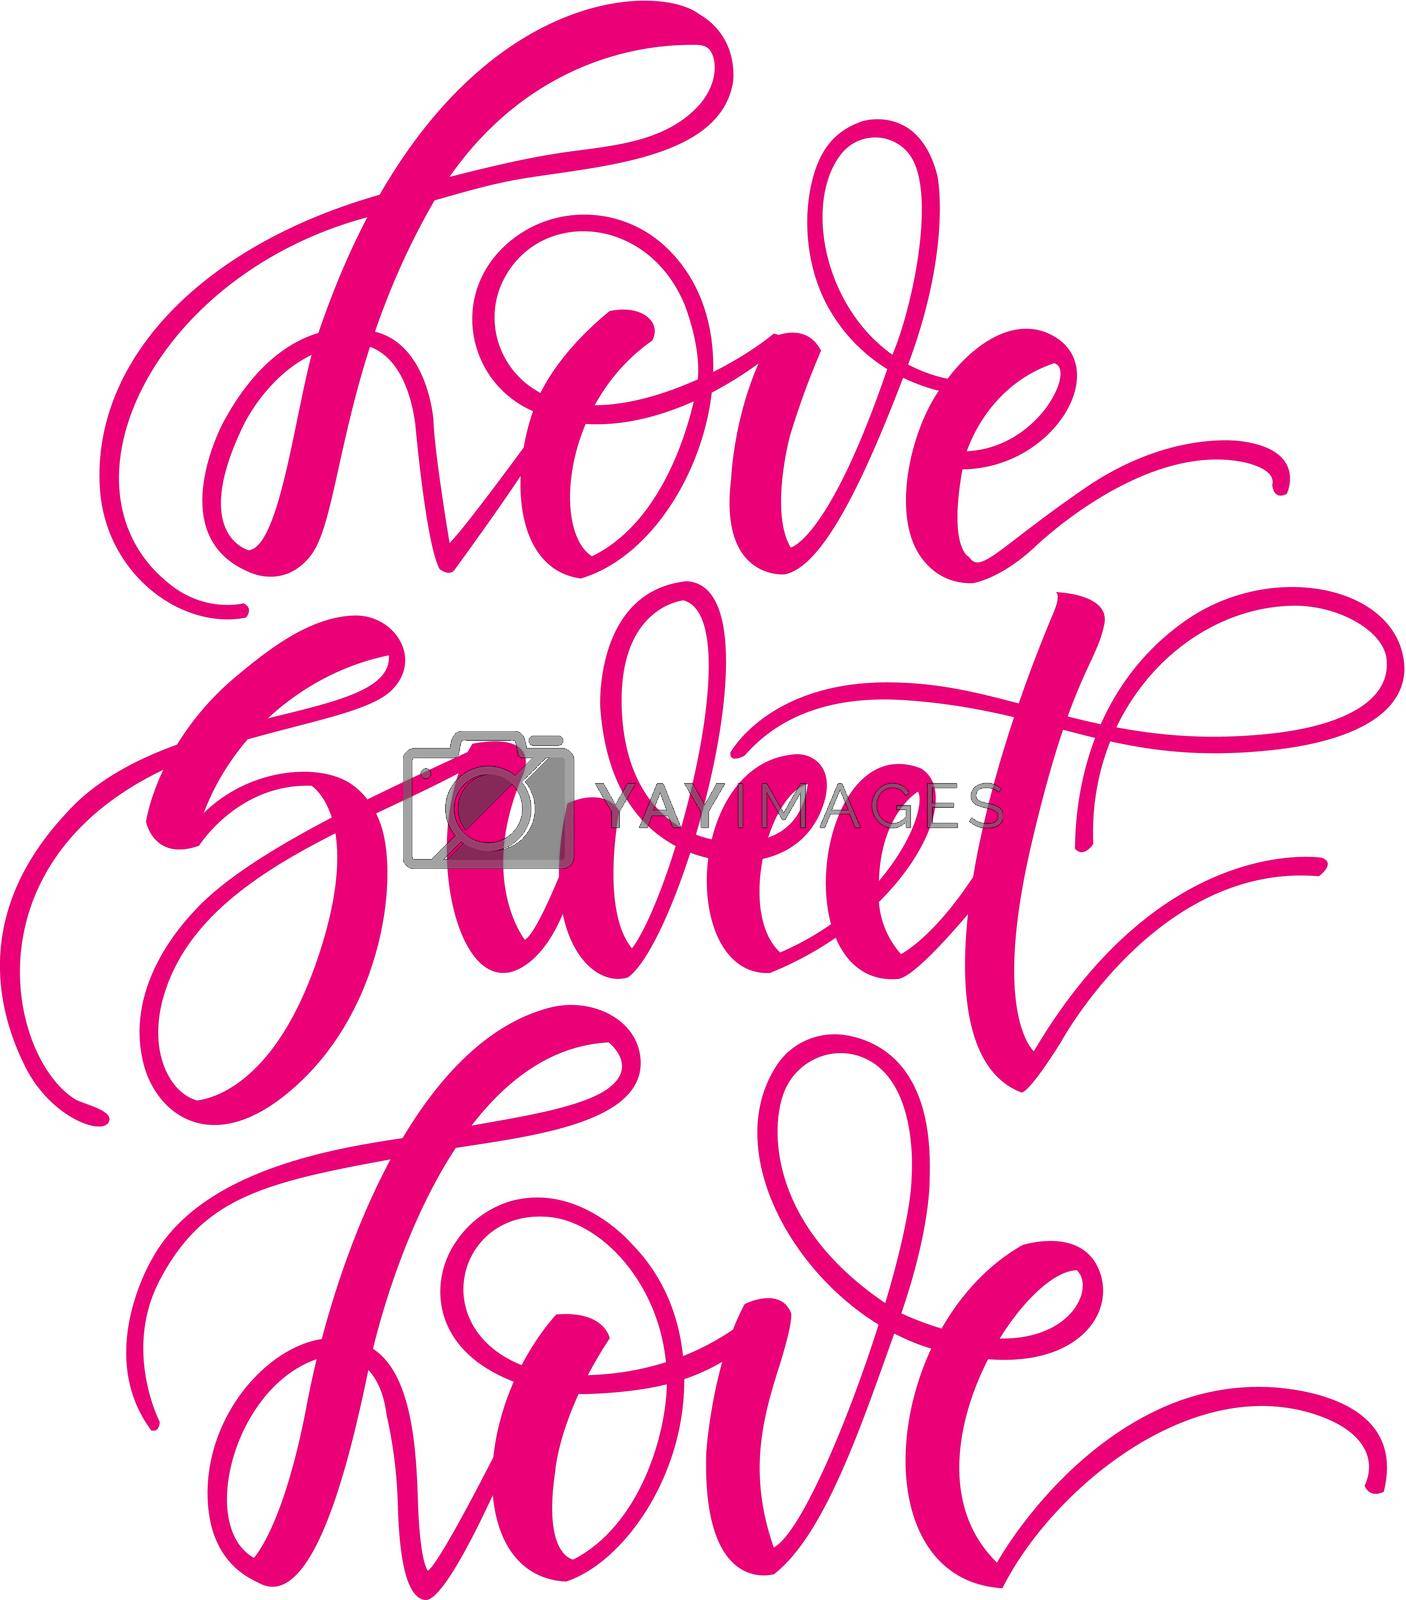 Royalty free image of Love sweet love. Inspirational romantic lettering isolated on white background. Vector illustration for Valentines day greeting cards, posters, print on T-shirts and much more by Marin4ik